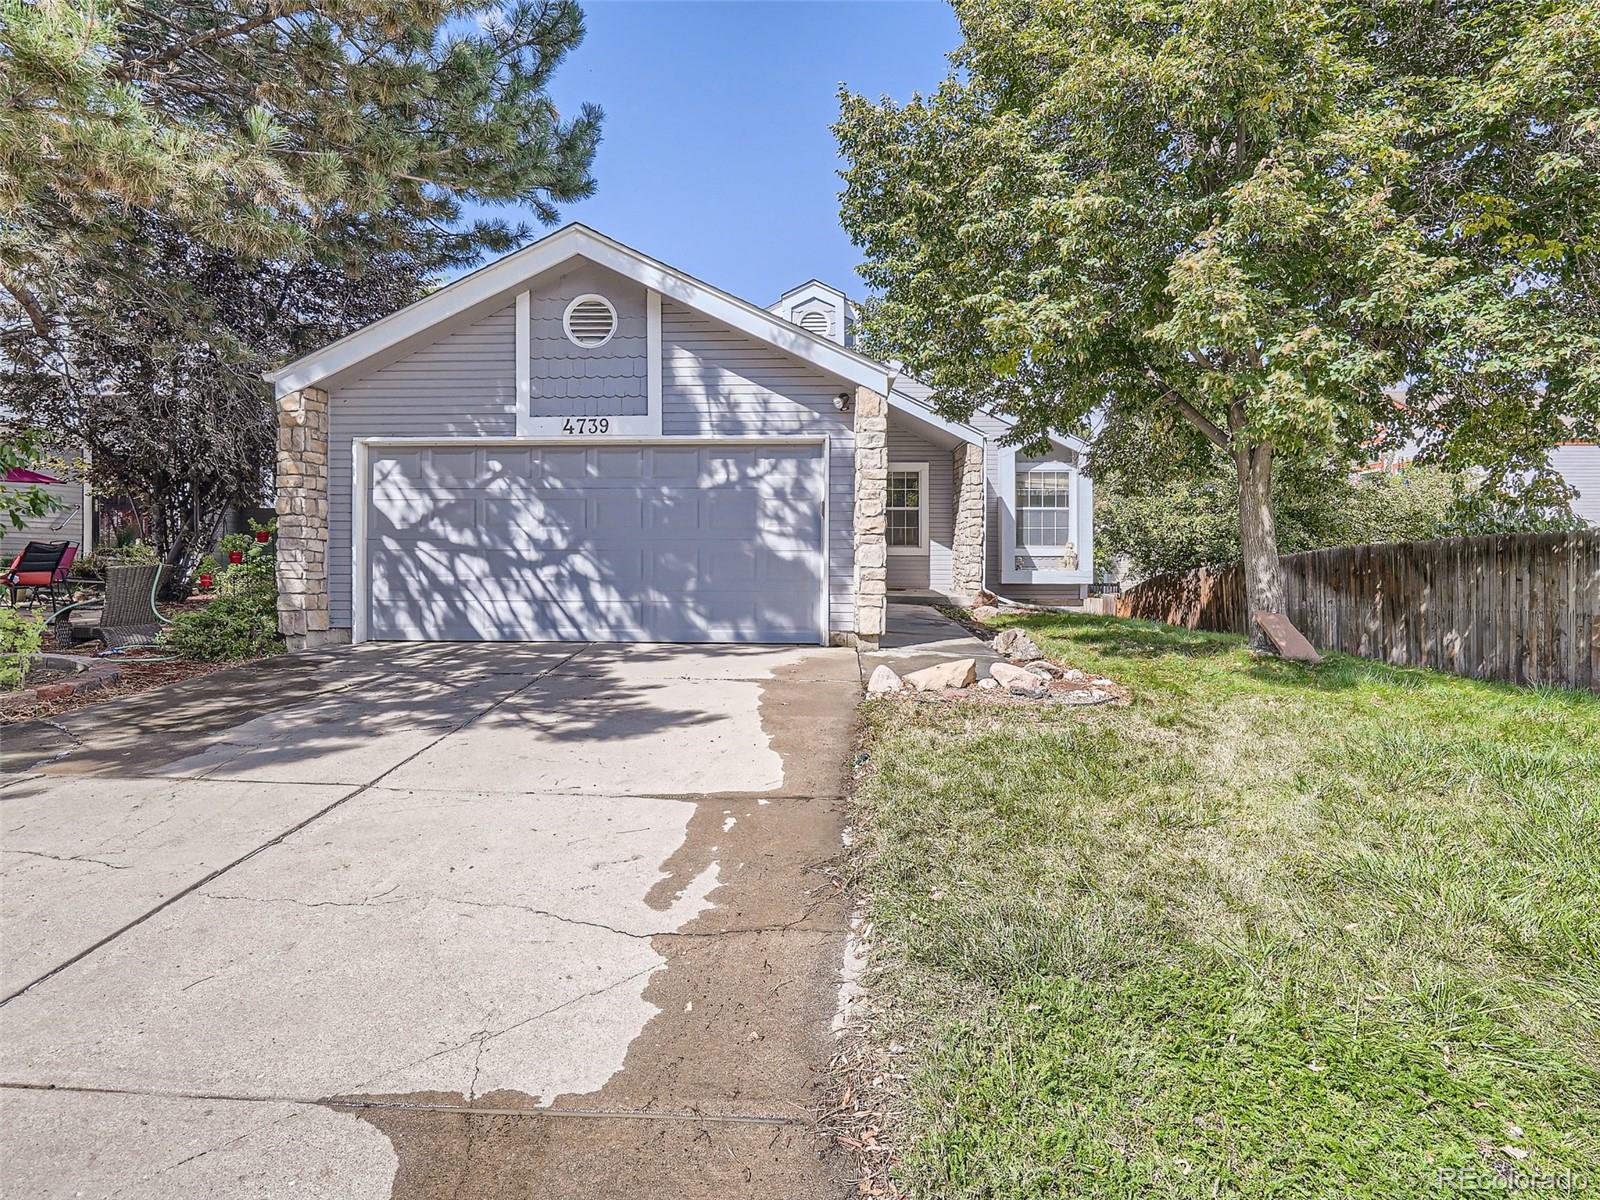 4739 w 68th avenue, Arvada sold home. Closed on 2024-01-19 for $581,000.